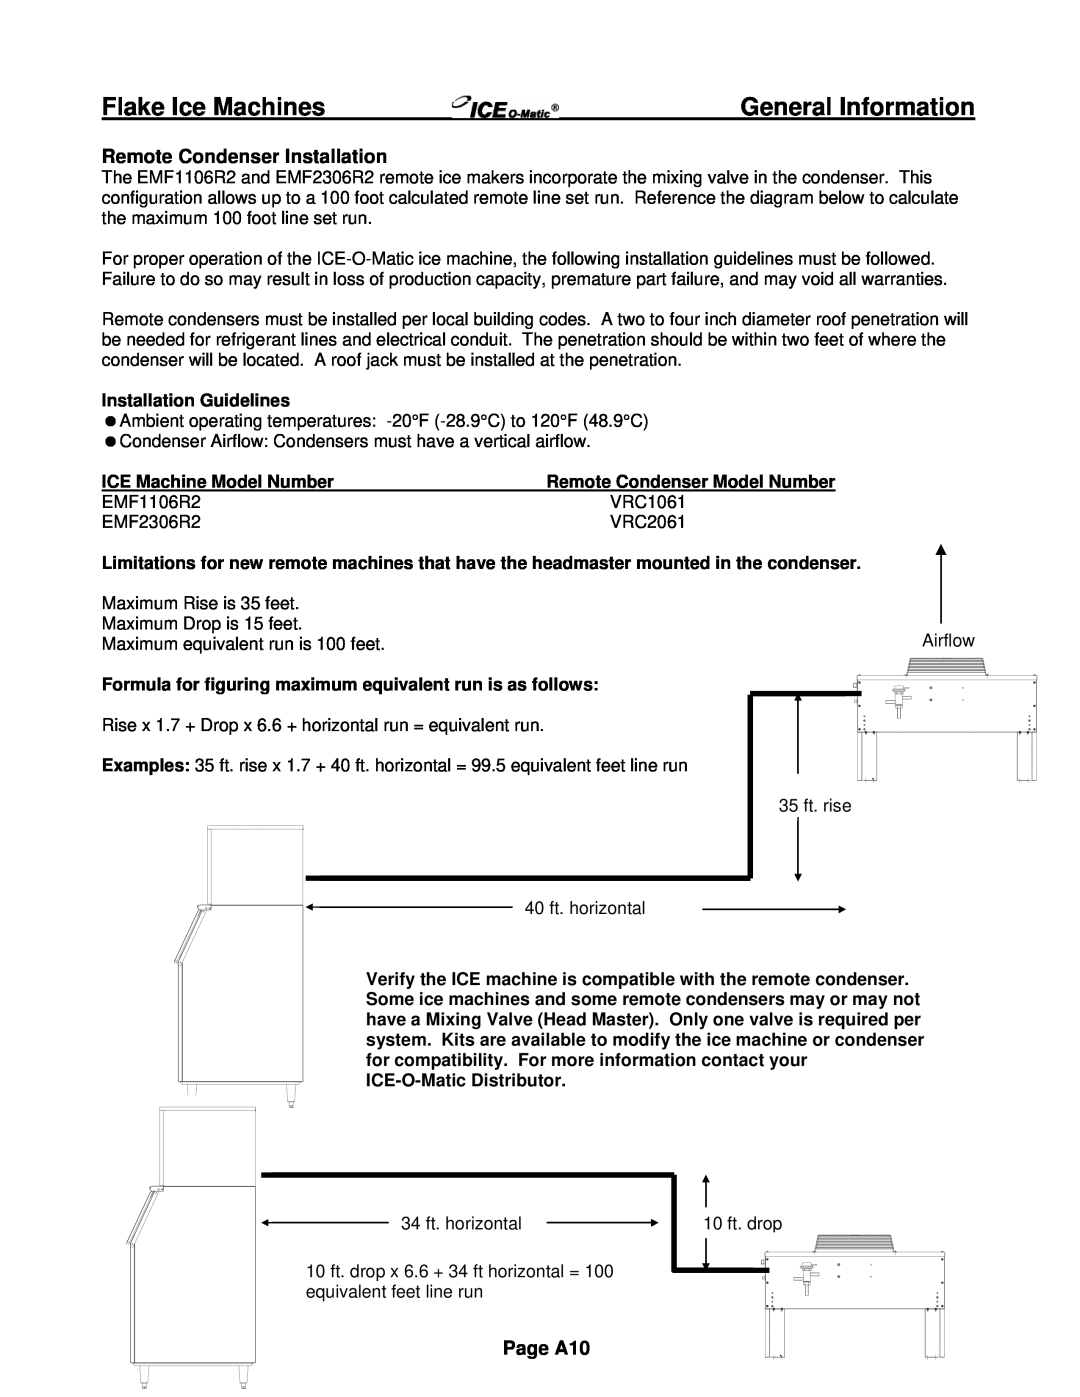 Ice-O-Matic EMF Series, EF Series General Information, Remote Condenser Installation, Page A10, Installation Guidelines 